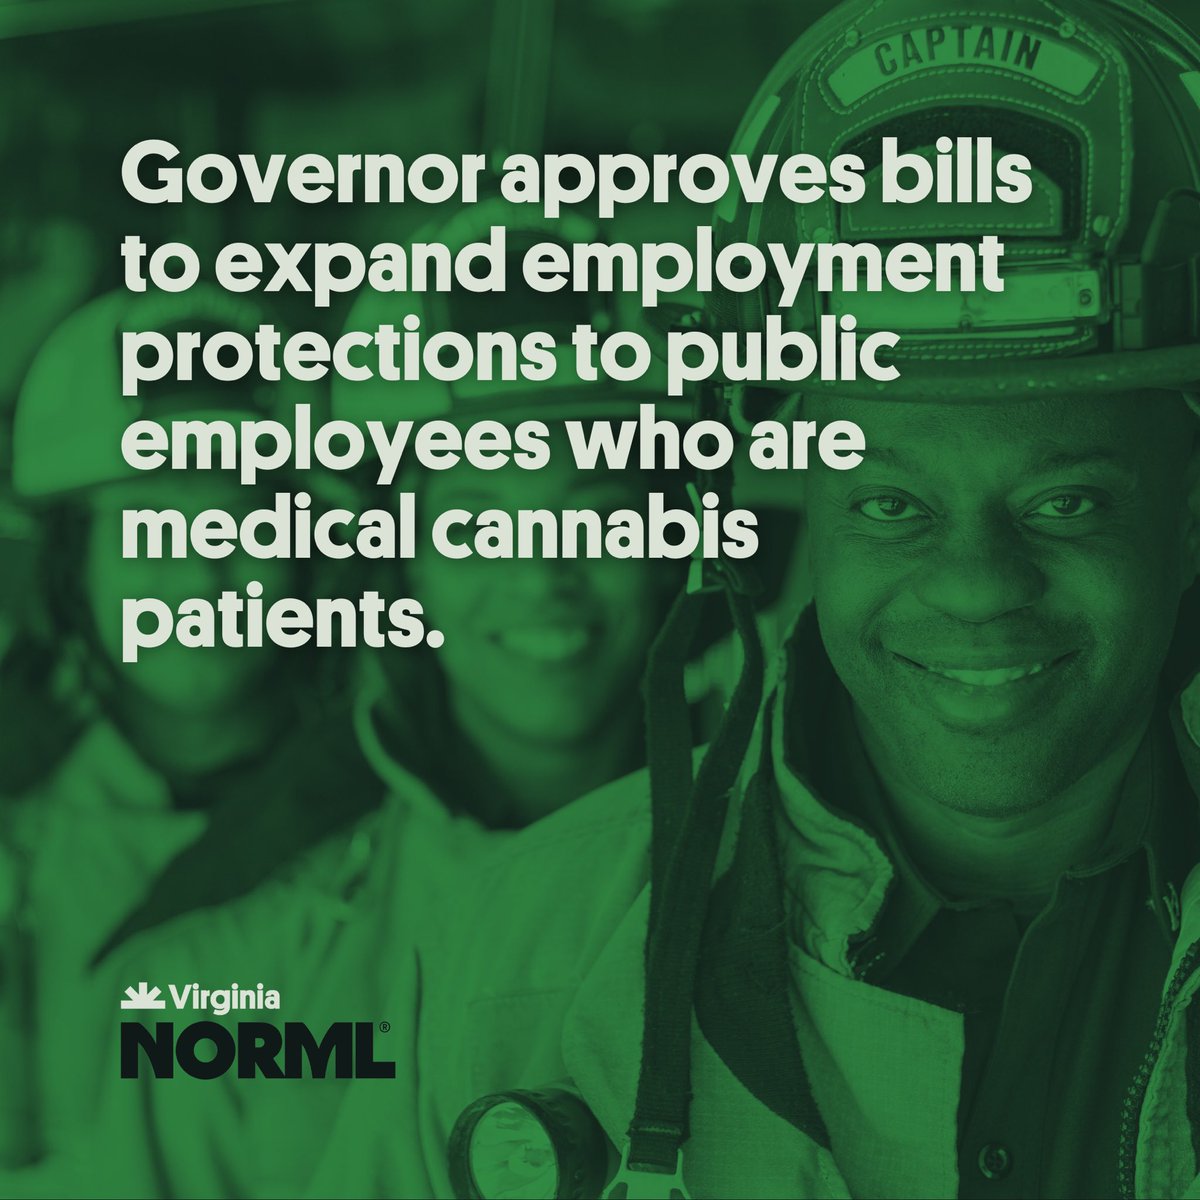 🚒 'Virginia's firefighters, emergency services providers, and civil servants across the Commonwealth deserve the same job protections currently provided to private employees for their lawful and responsbile use of medical cannabis. This is a long overdue victory.'⁠